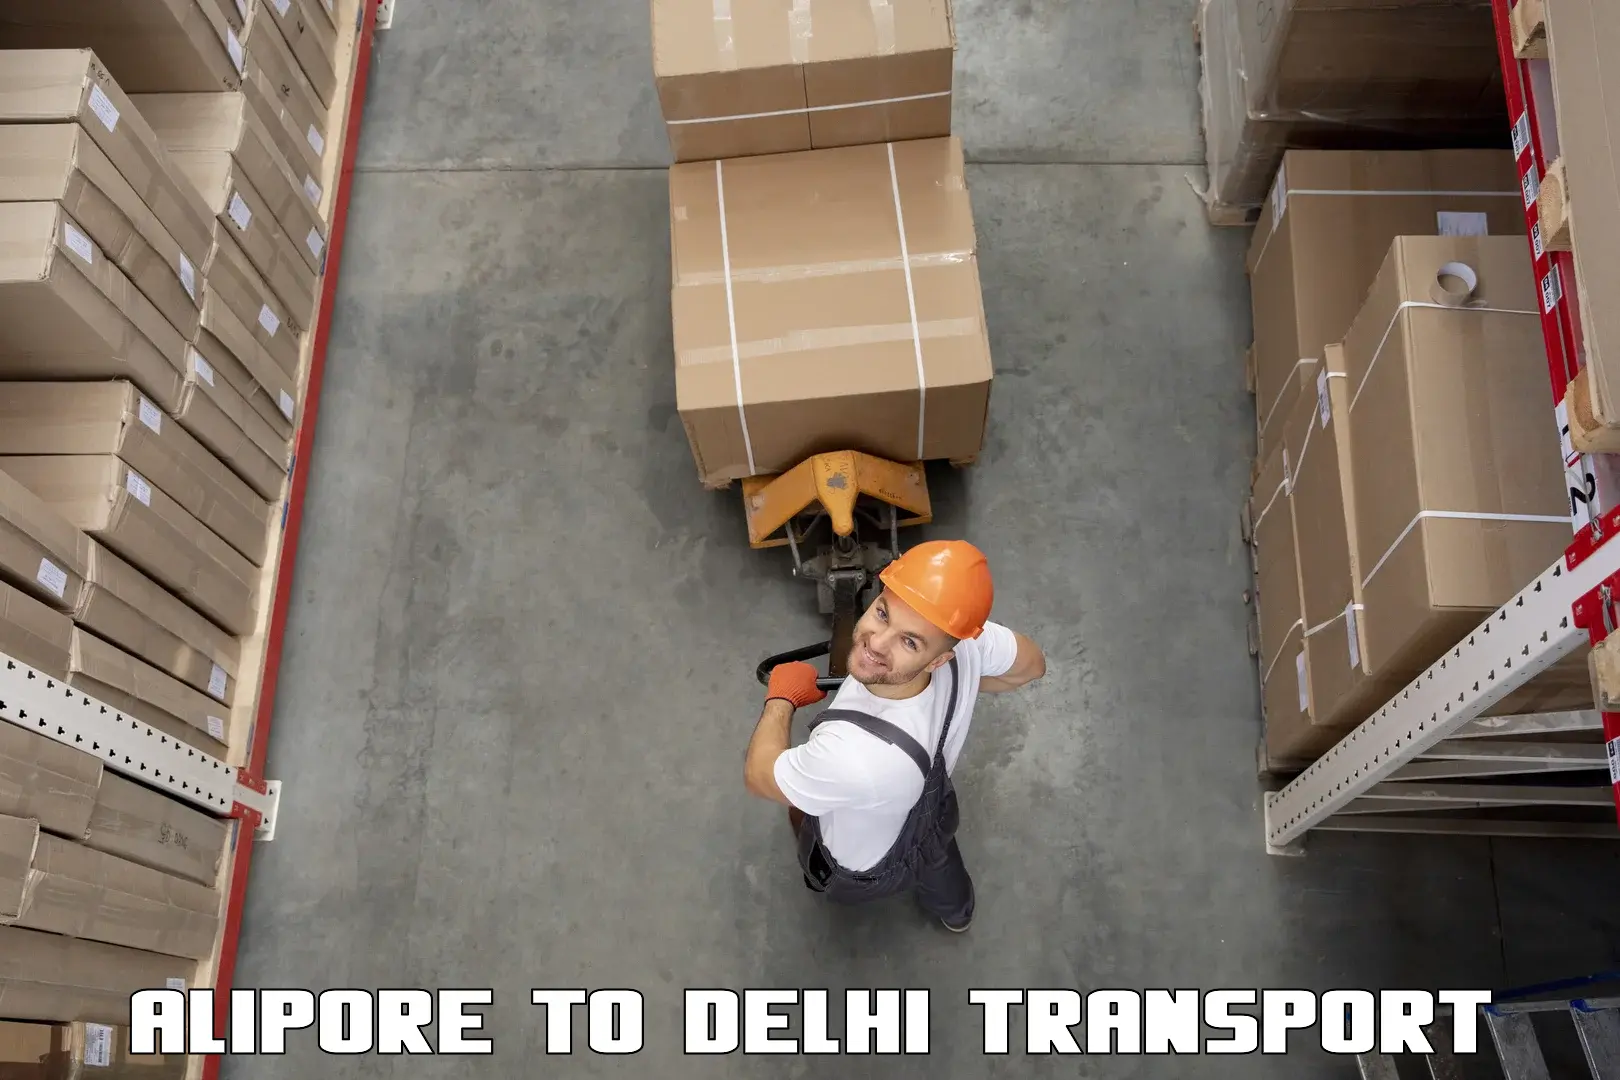 Delivery service Alipore to NCR